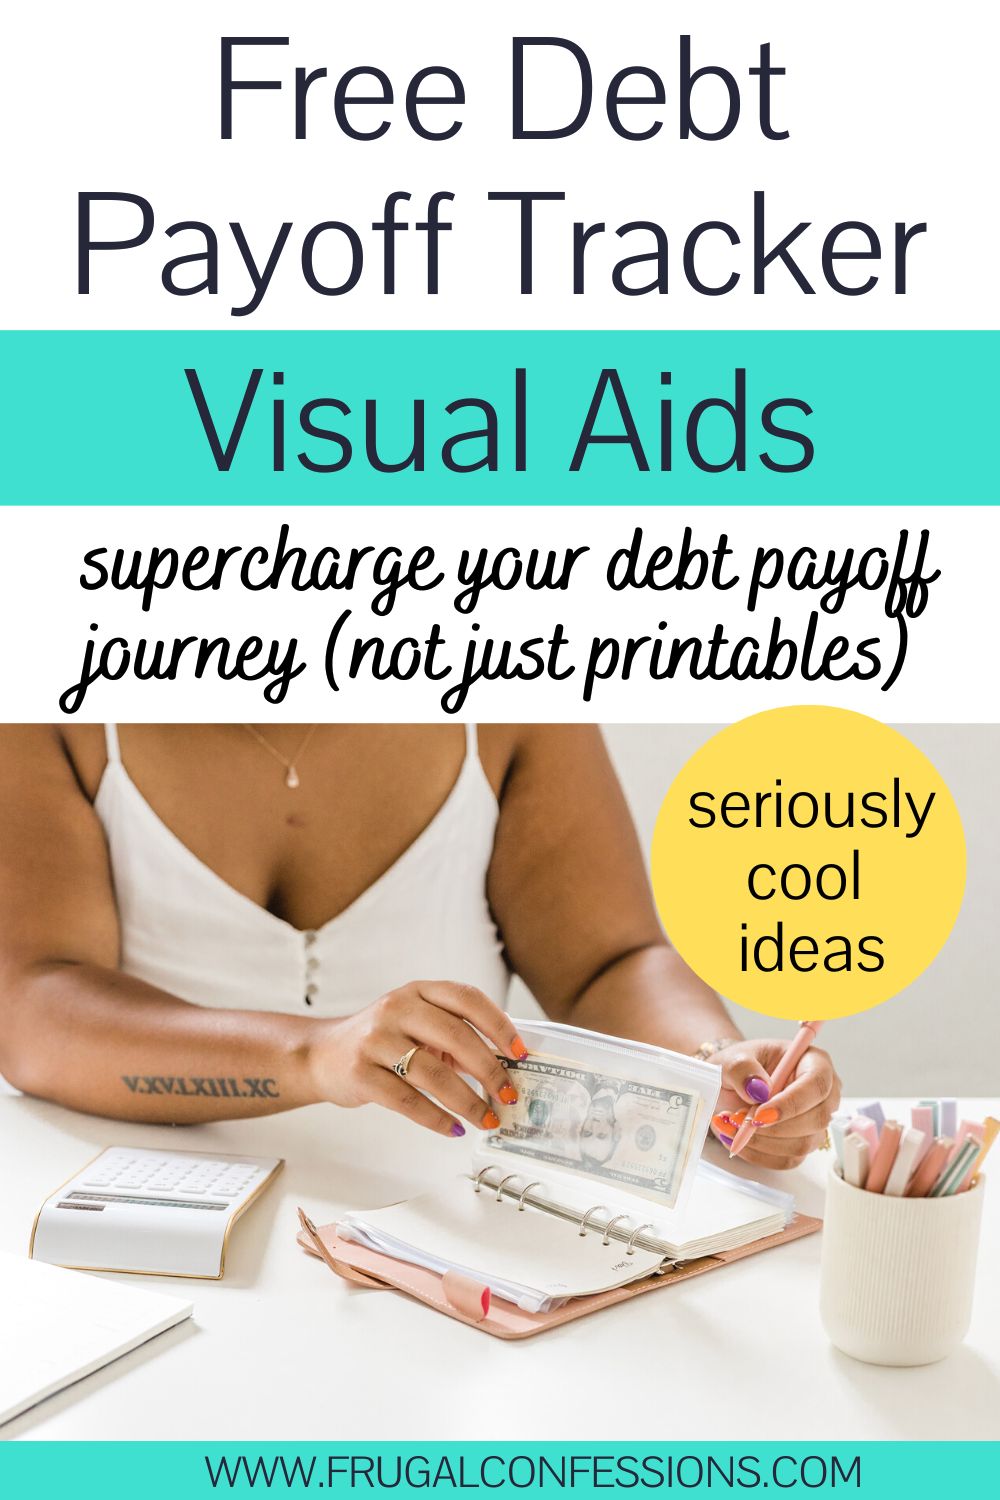 woman at desk putting money into A6 binder envelopes, text overlay "free debt payoff tracker visual aids"